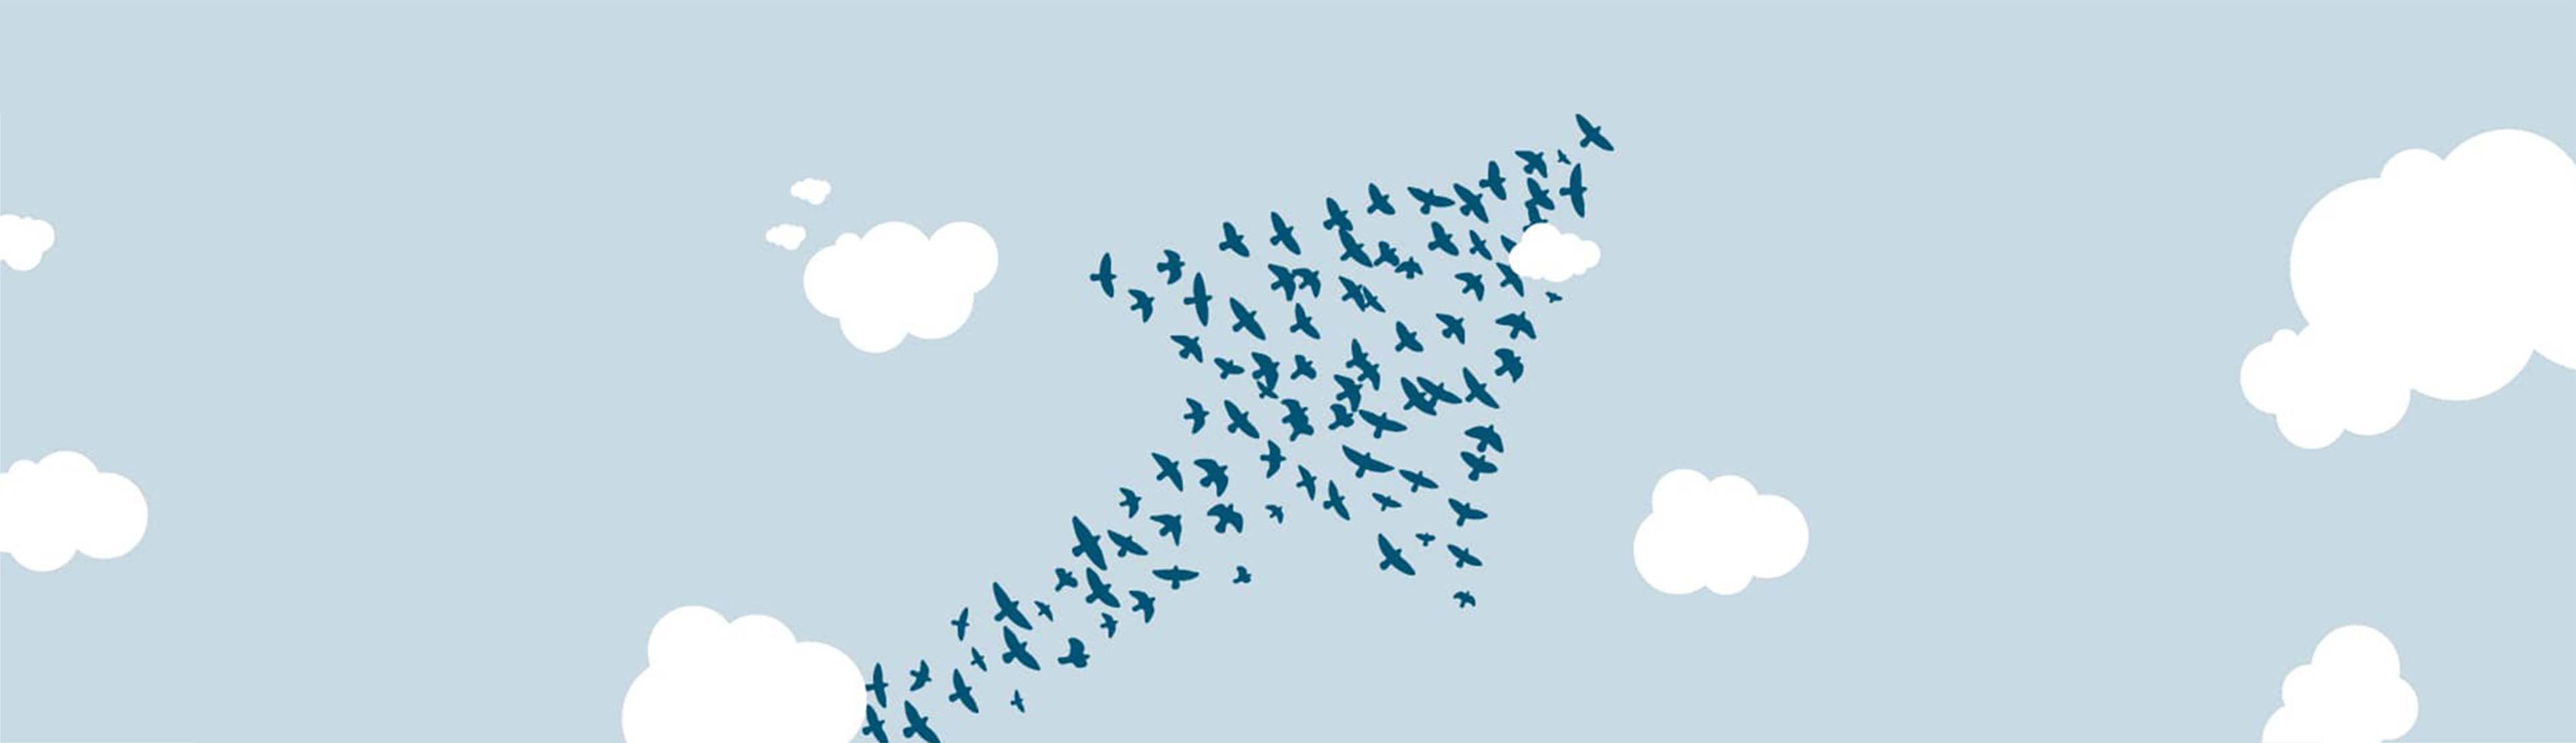 an graphic illustration of an arrow comprised of birds with a light blue background